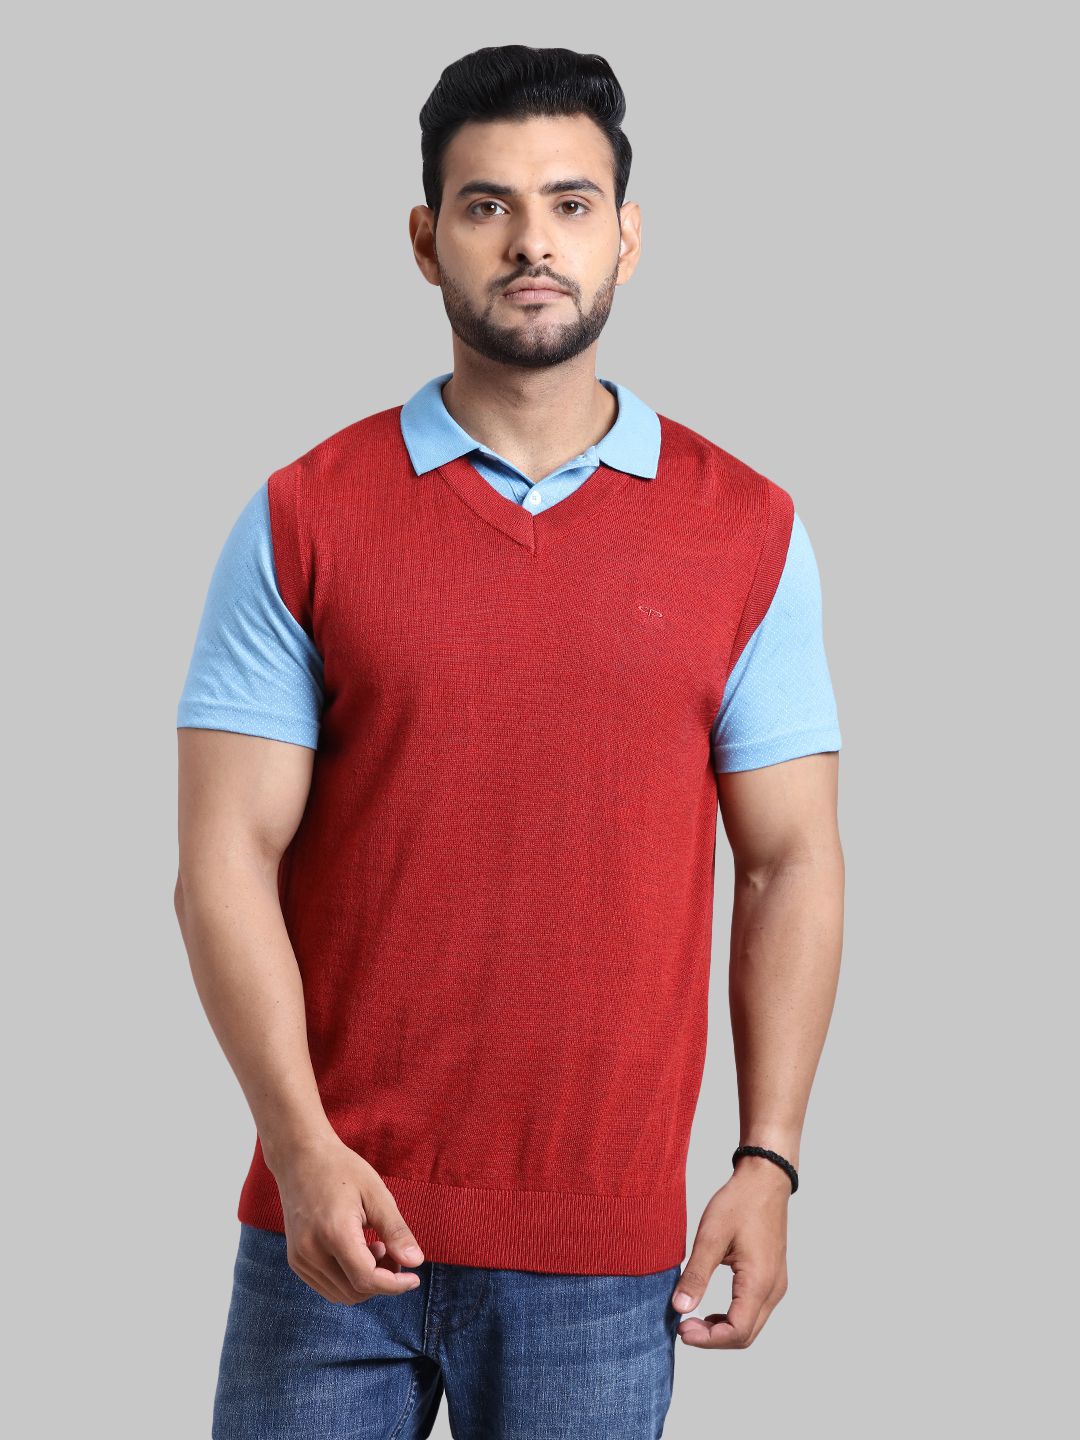     			Colorplus Acrylic V-Neck Men's Sleeveless Pullover Sweater - Red ( Pack of 1 )